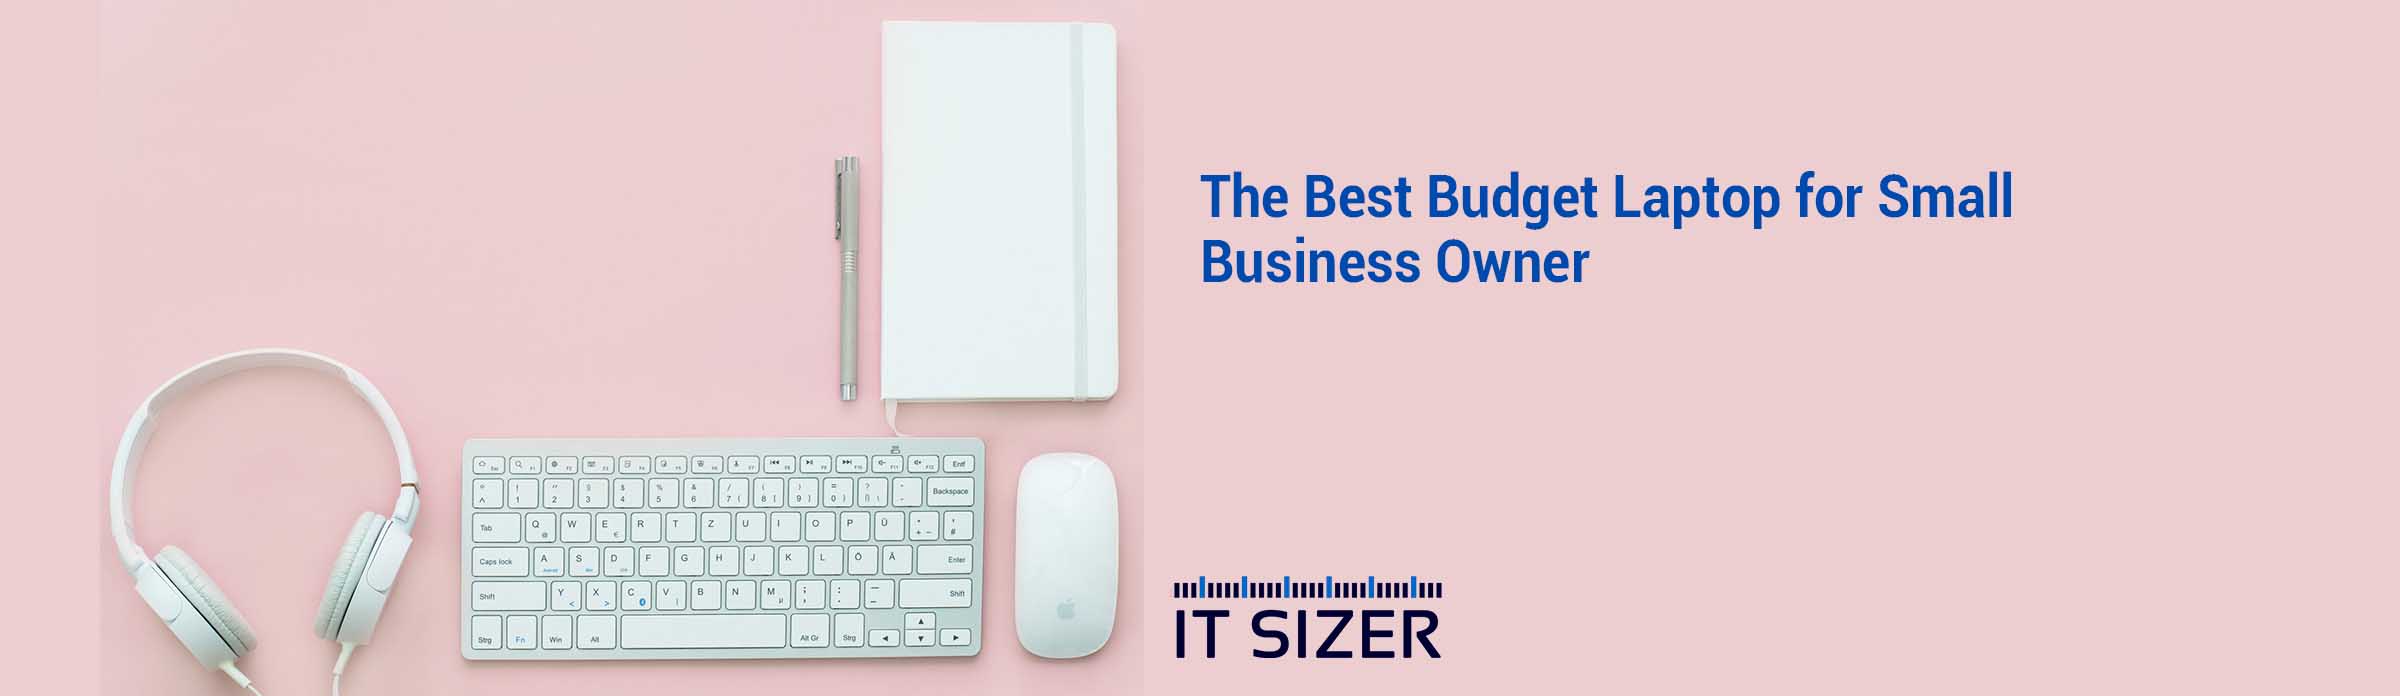 The best budget laptop for small business owner